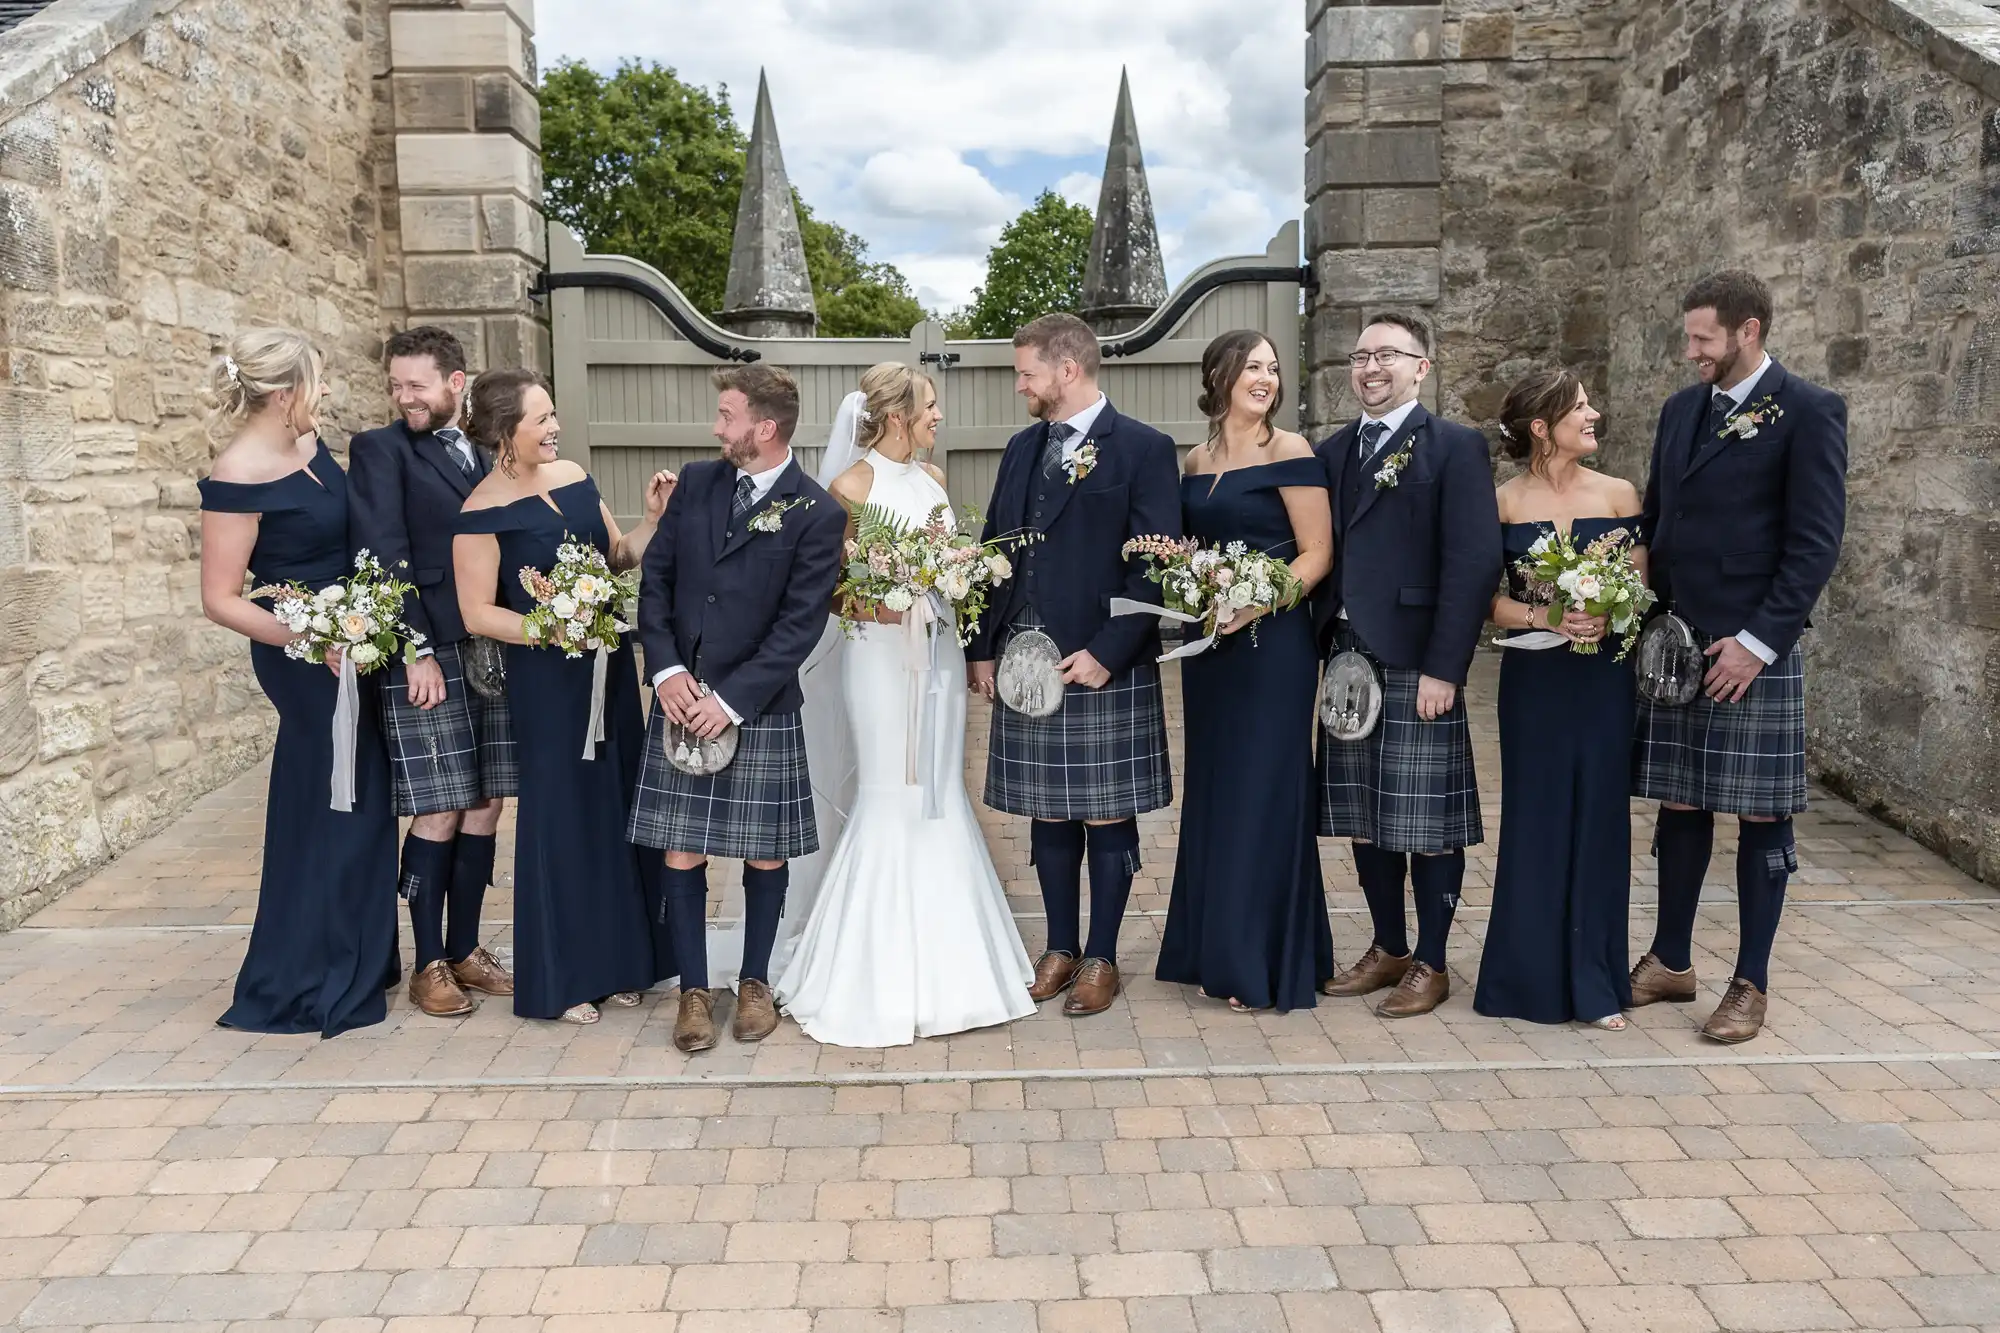 A wedding party consisting of six men in kilts and five women in navy dresses smiling and posing outdoors with bouquets.